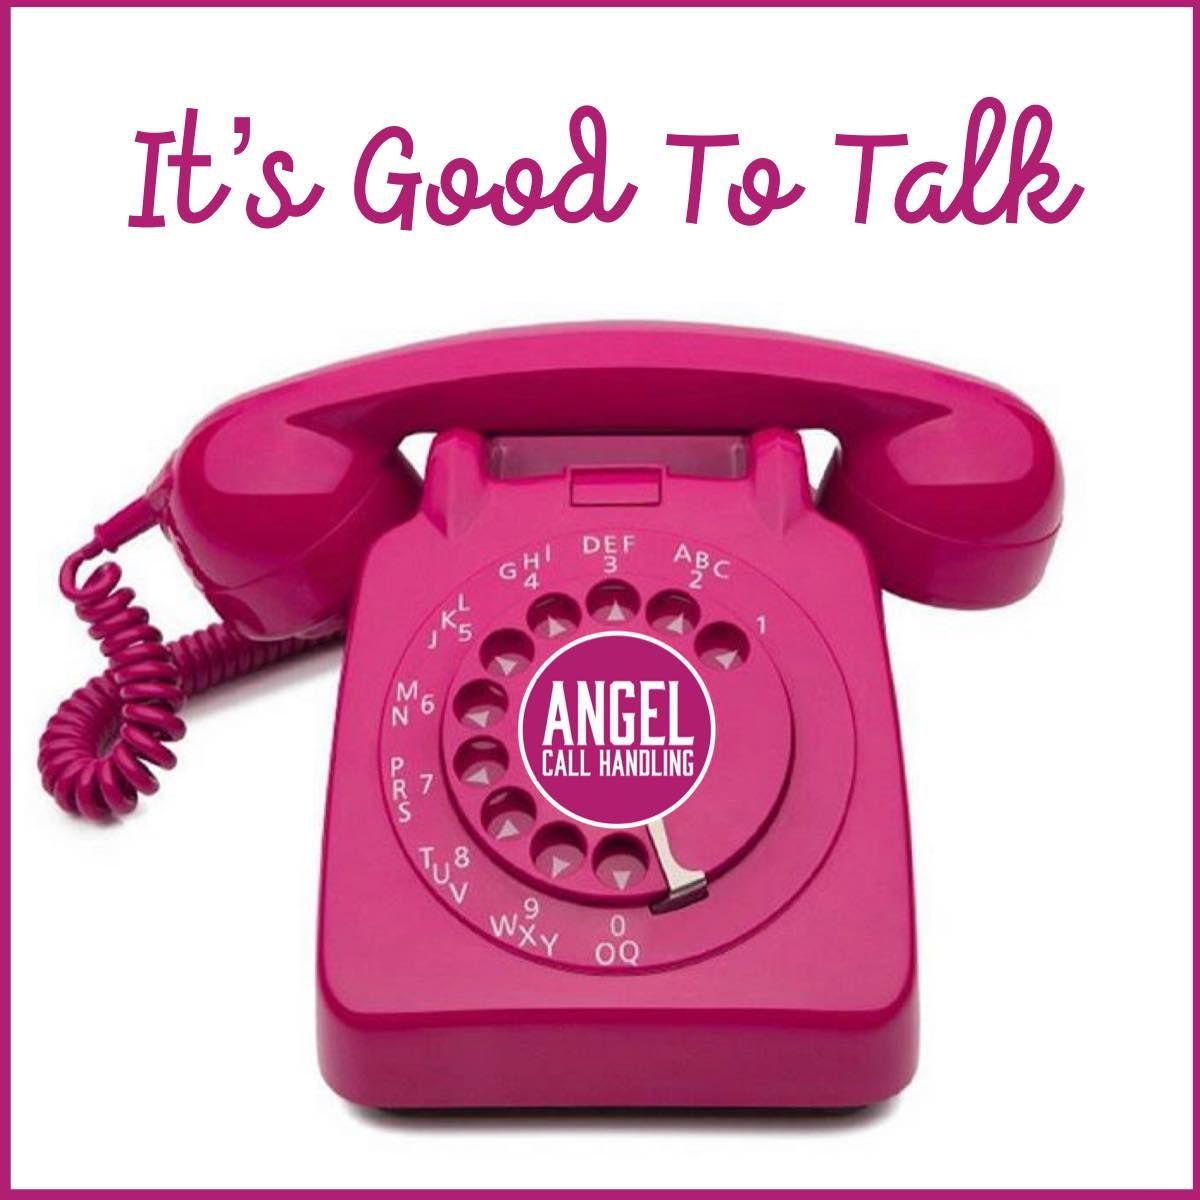 Get temporary cover for your business calls during periods of staff shortages and office closure... Call @ACH_Hampshire on 01264 568430 to be up and running today! For more details visit their website! angelcallhandling.co.uk #callanswering